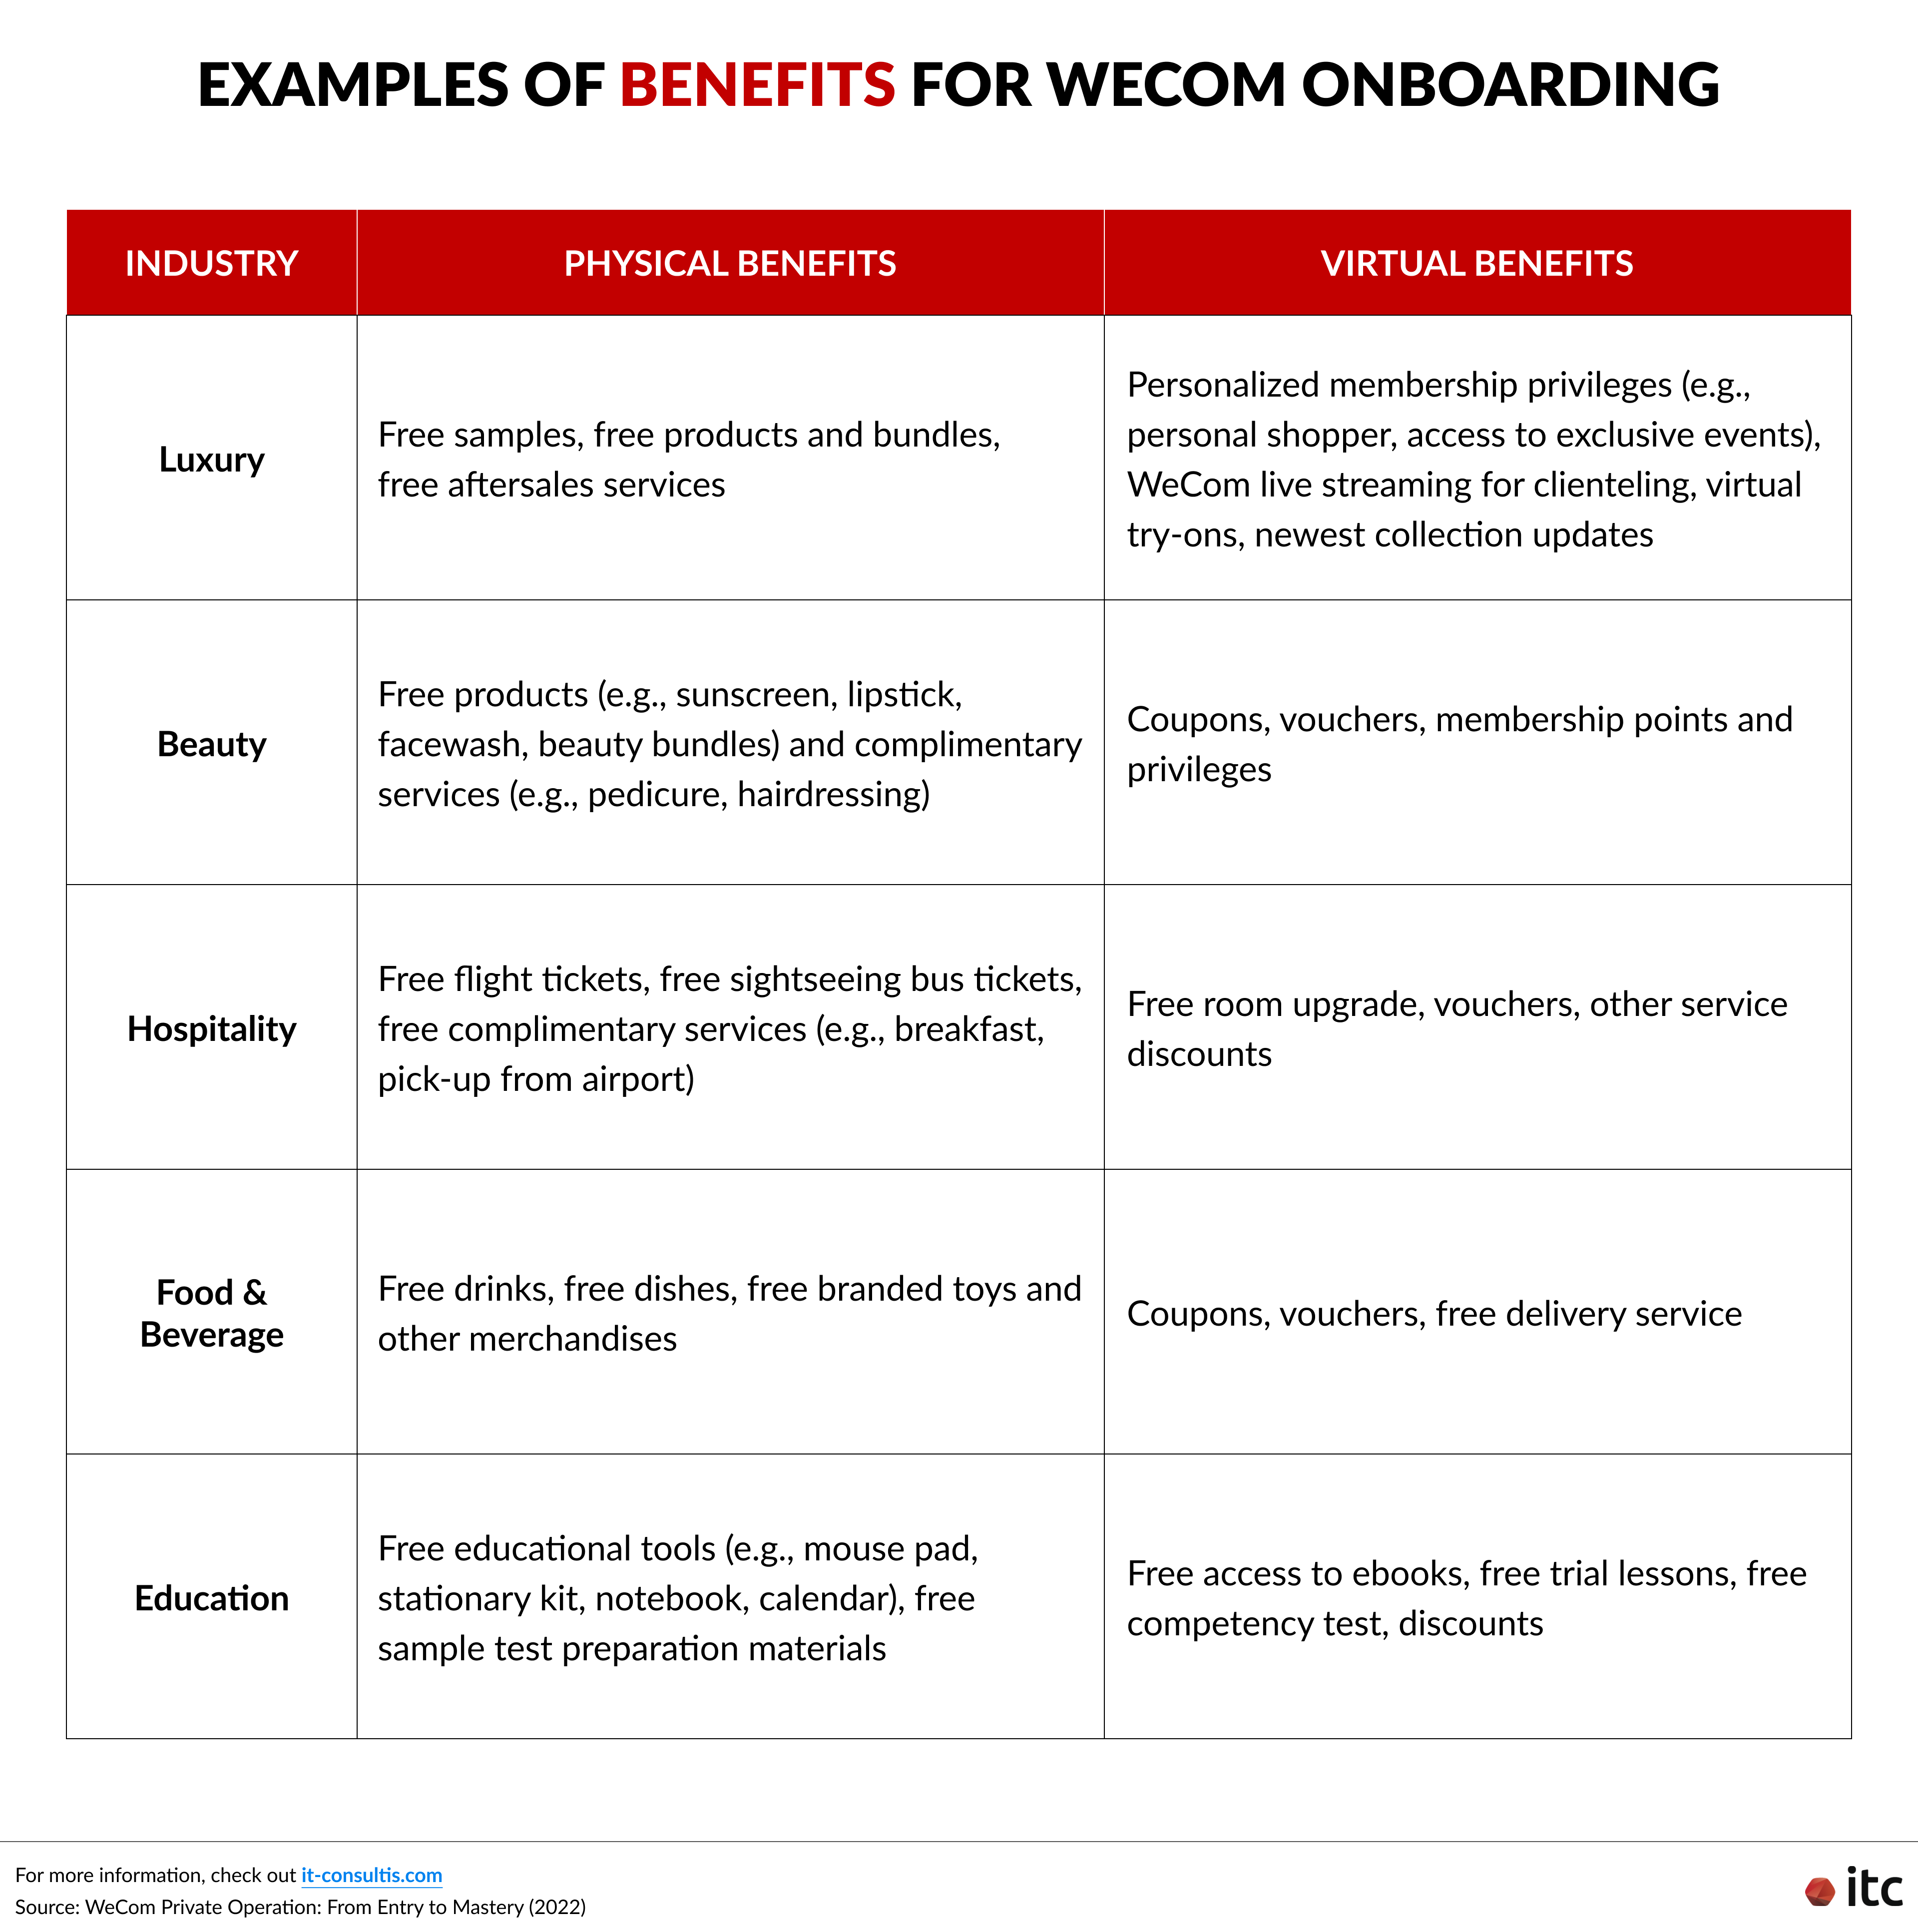 Examples of benefits for customer to encourage onboarding to WeCom (WeChat Work)